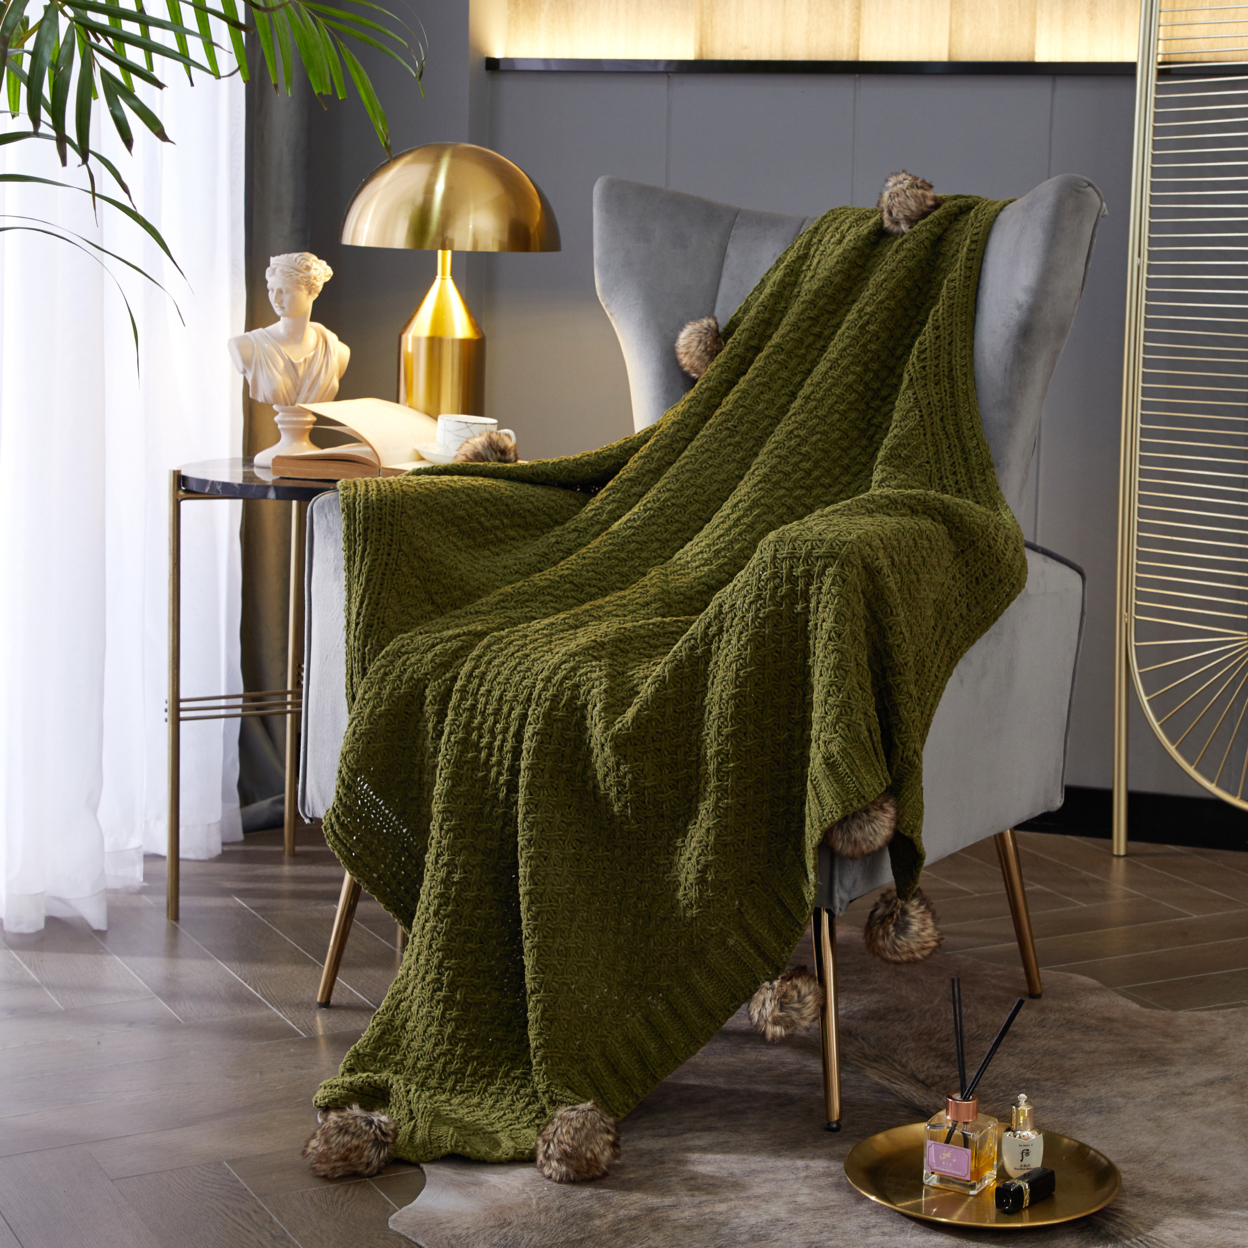 NY&C Home Corsey Knitted Throw Blanket Plush Super Soft Solid Color Design - Green